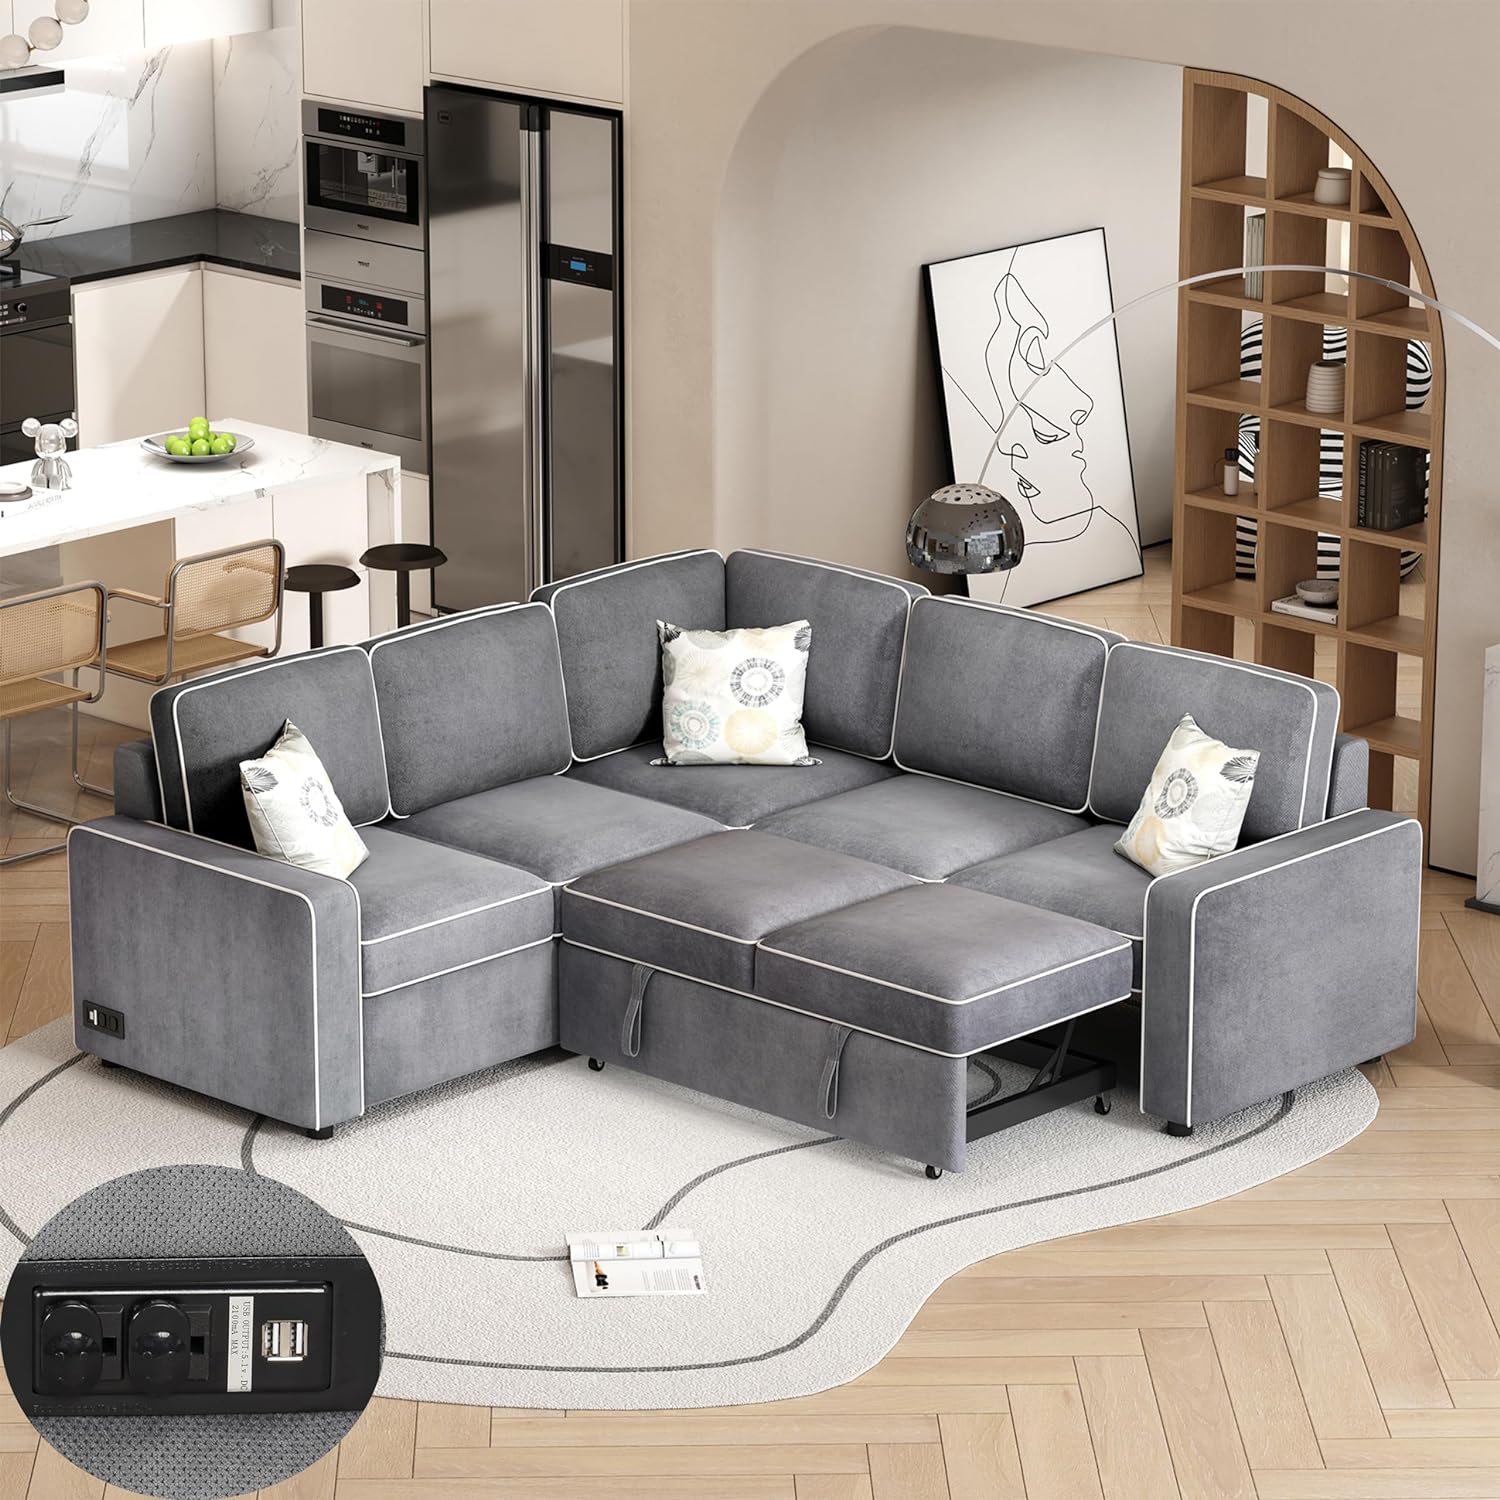 L-Shaped Corner Symmetrical Sleeper Sectional Sofa with Pull Out Couch Bed and 3 Pillow, Multifunctional Modular Convertible Sofa&Couch Cum Sofabed W/2 USB Ports, Power Sockets for Living Room